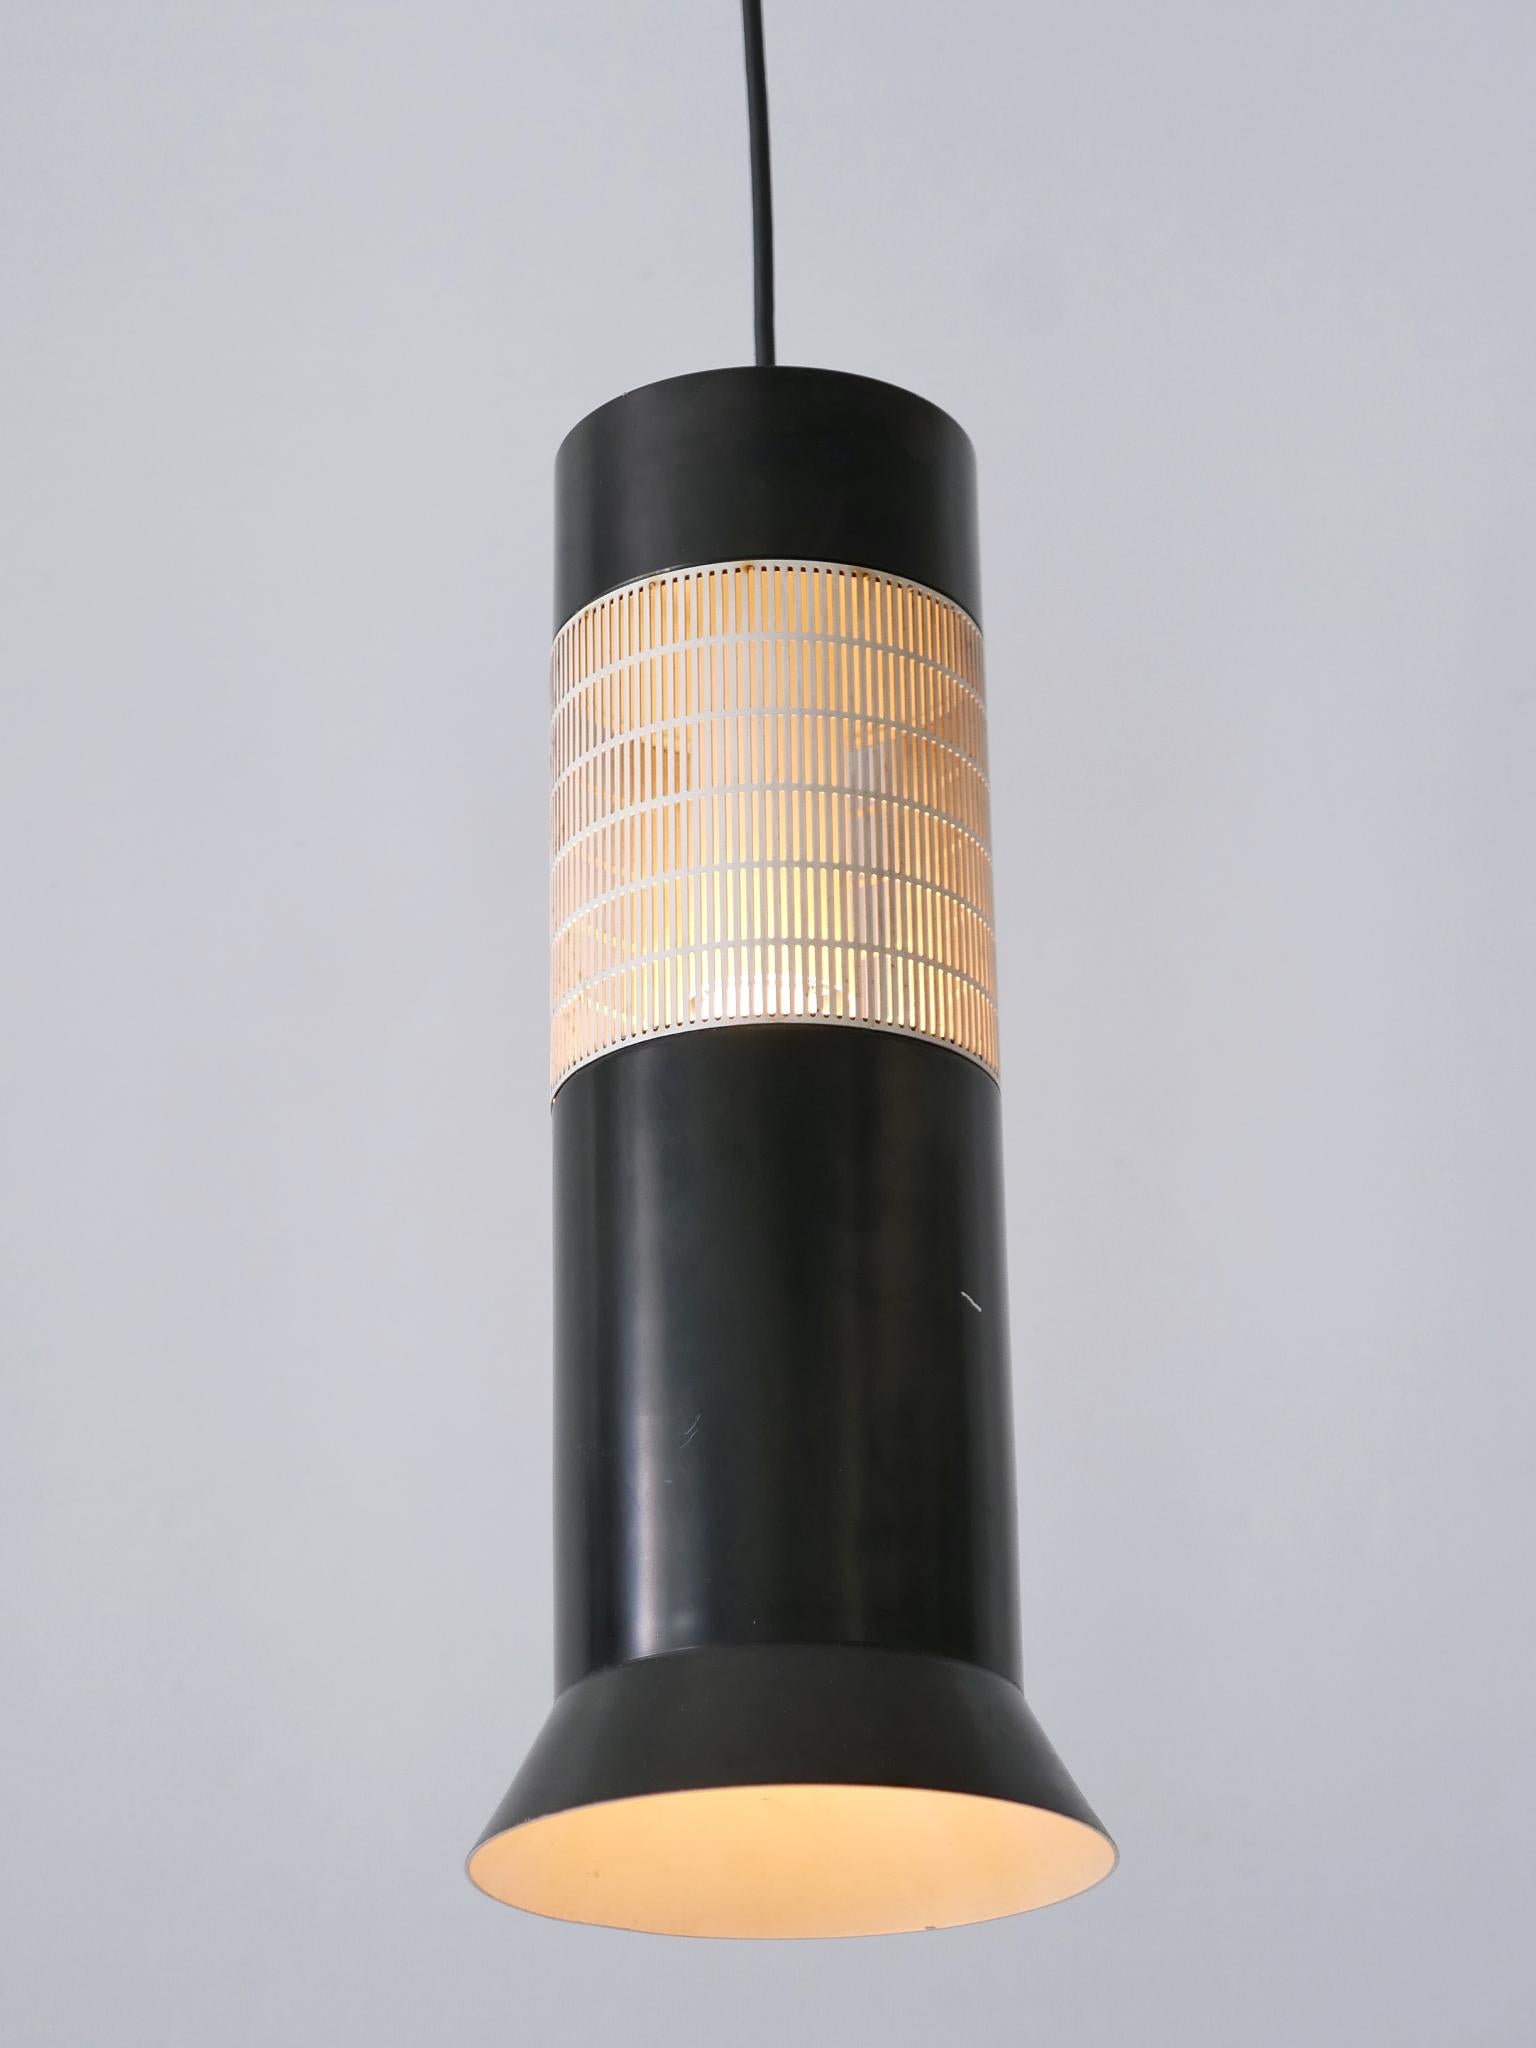 Elegant and highly decorative Mid-Century Modern bi-color pendant lamp or hanging light. Designed & manufactured probably in Germany, 1960s.

Executed in white, & black painted and perforated aluminium, the pendant lamp needs 1 x E27 / E26 Edison